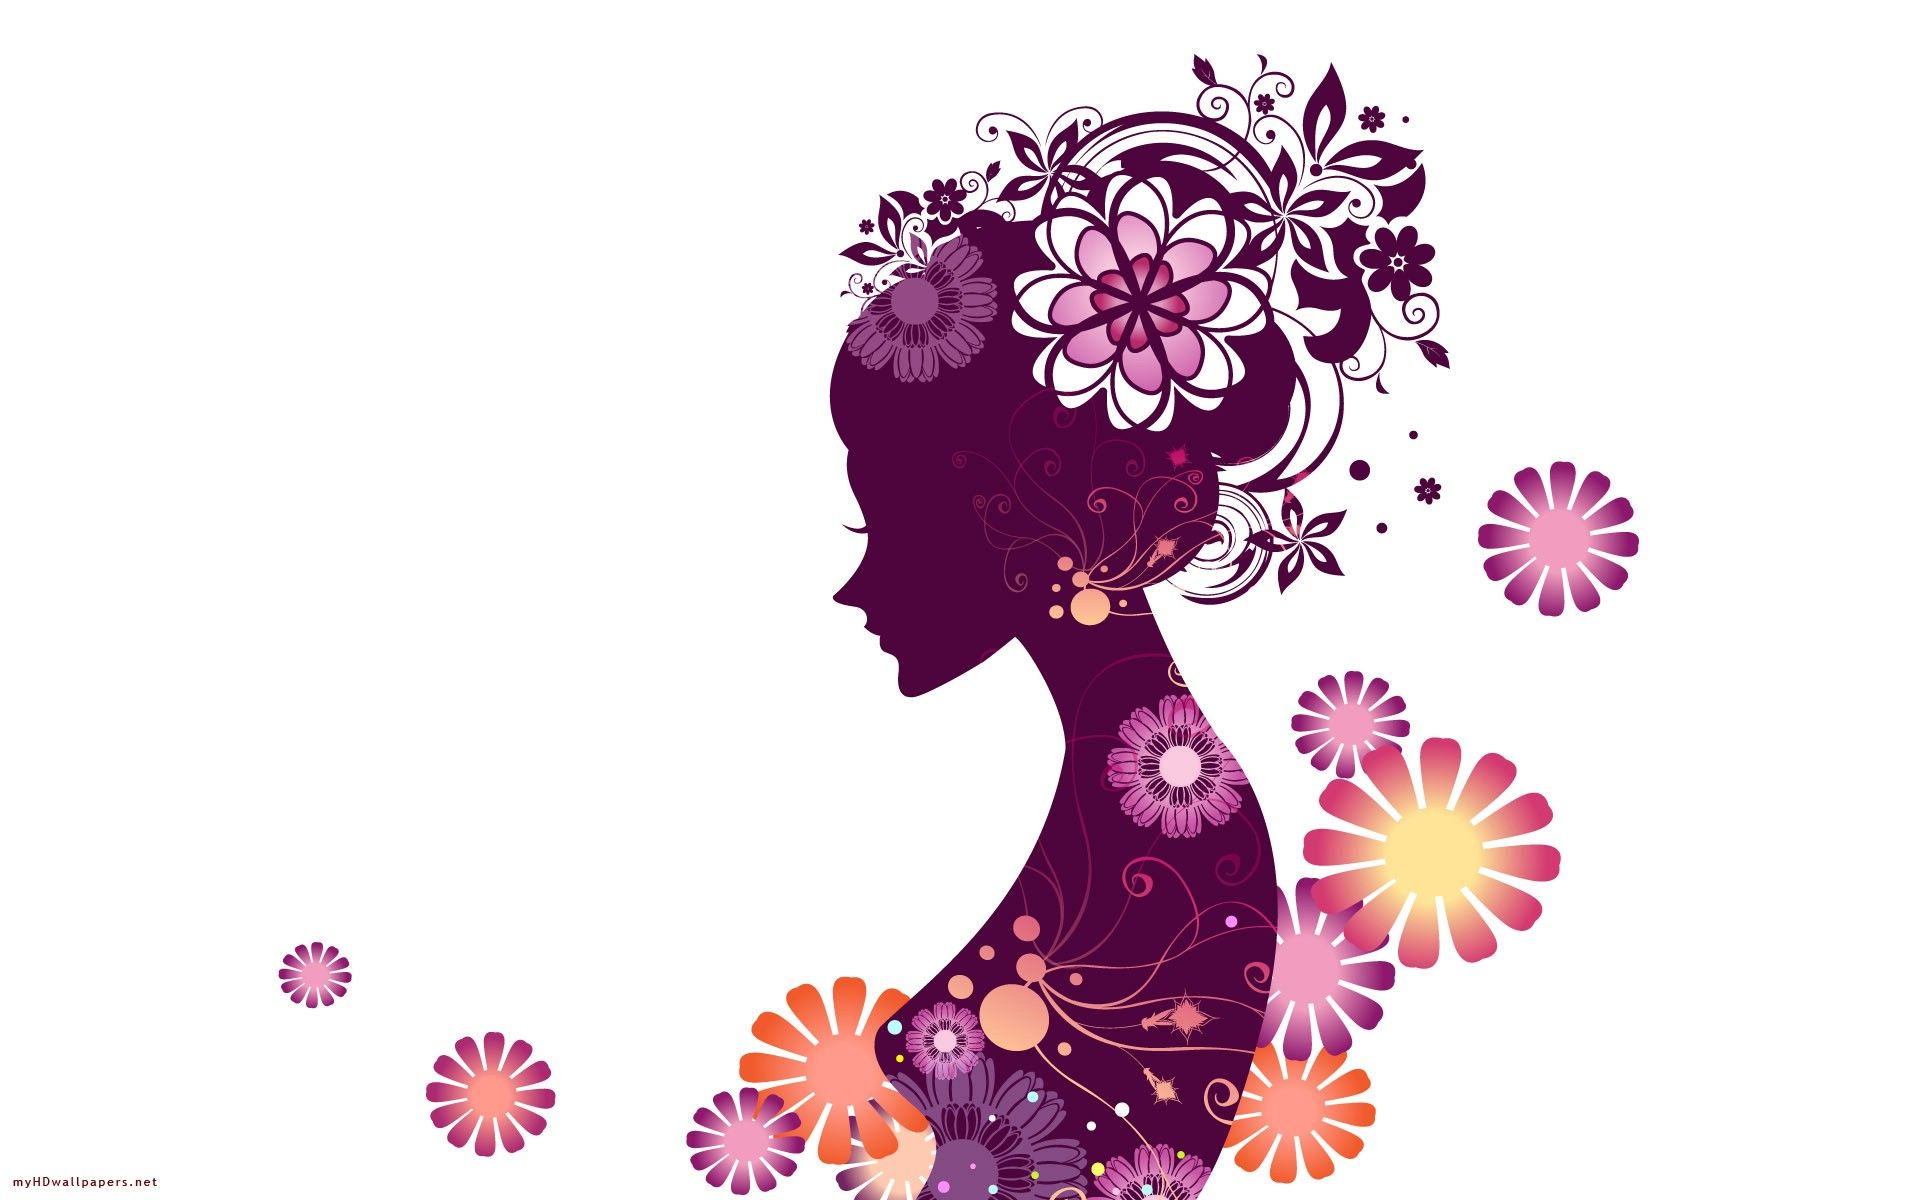 Pretty Girl Vector Image Shopping Vector Illustration, International Women's Day Wallpaper and Vector Girl with Bicycle / Newdesignfile.com